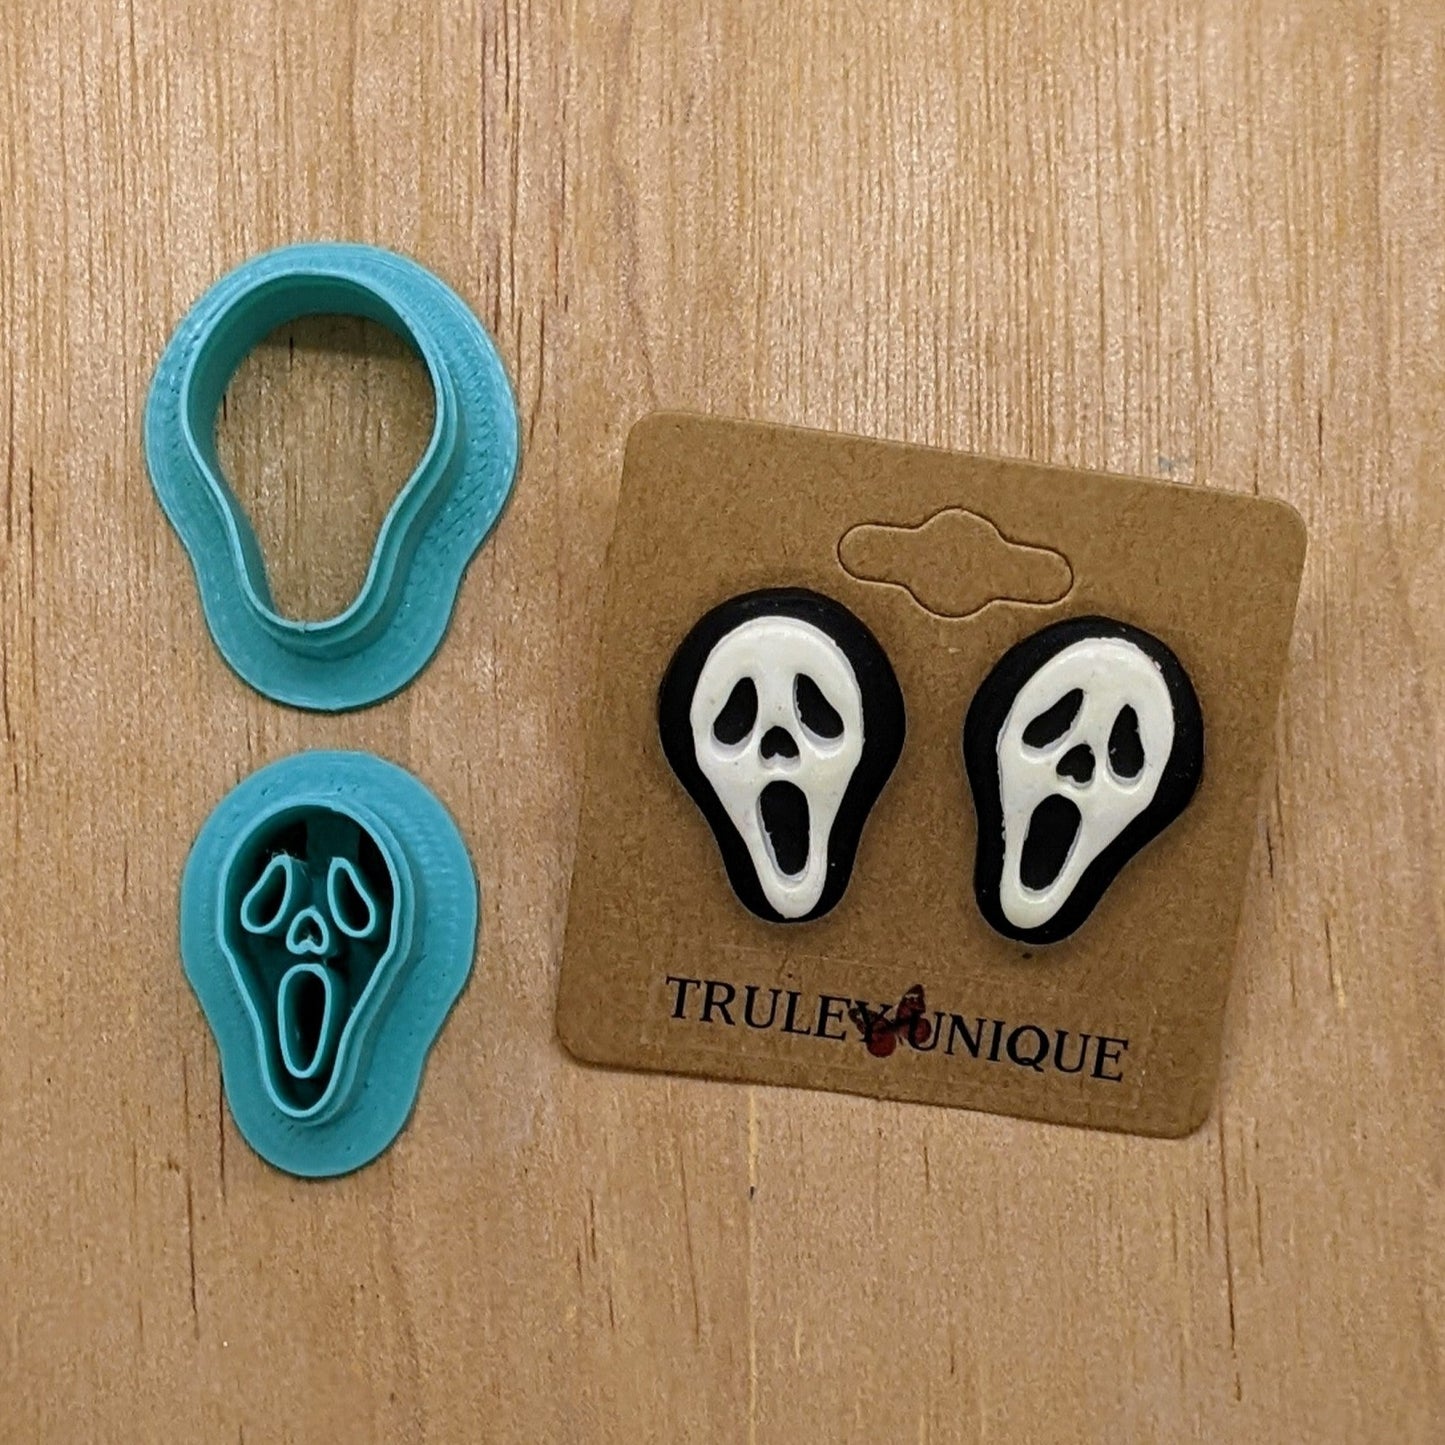 Scream Ghost Face Mask 2 Piece Cutter Set for Cookies, Ceramics, Pottery, Polymer Clay, Fondant - Multi-Medium Craft & Baking Tool